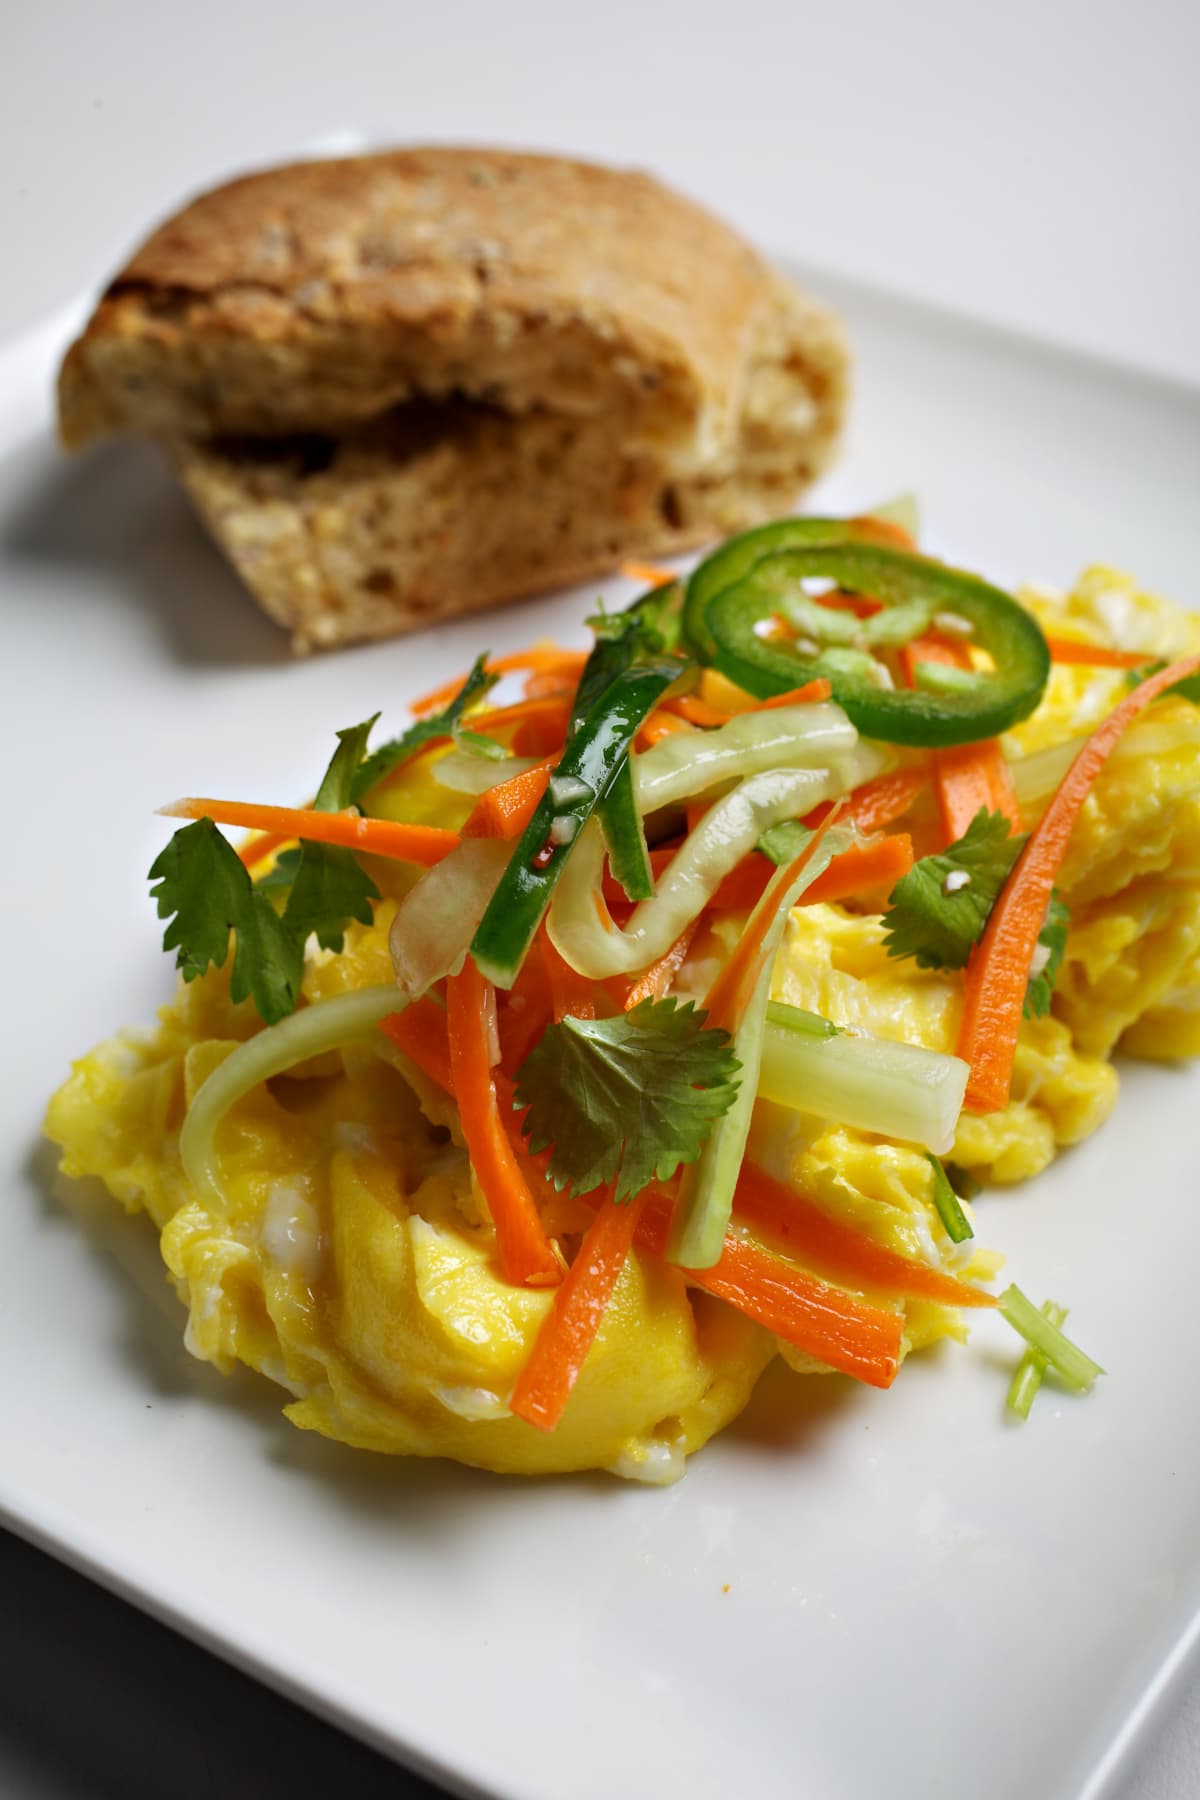 WASHINGTON, DC - OCTOBER 19: Dinner in Minutes Bahn Mi Scrambled Eggs photographed in Washington, DC. (Photo by Deb Lindsey/For The Washington Post via Getty Images)